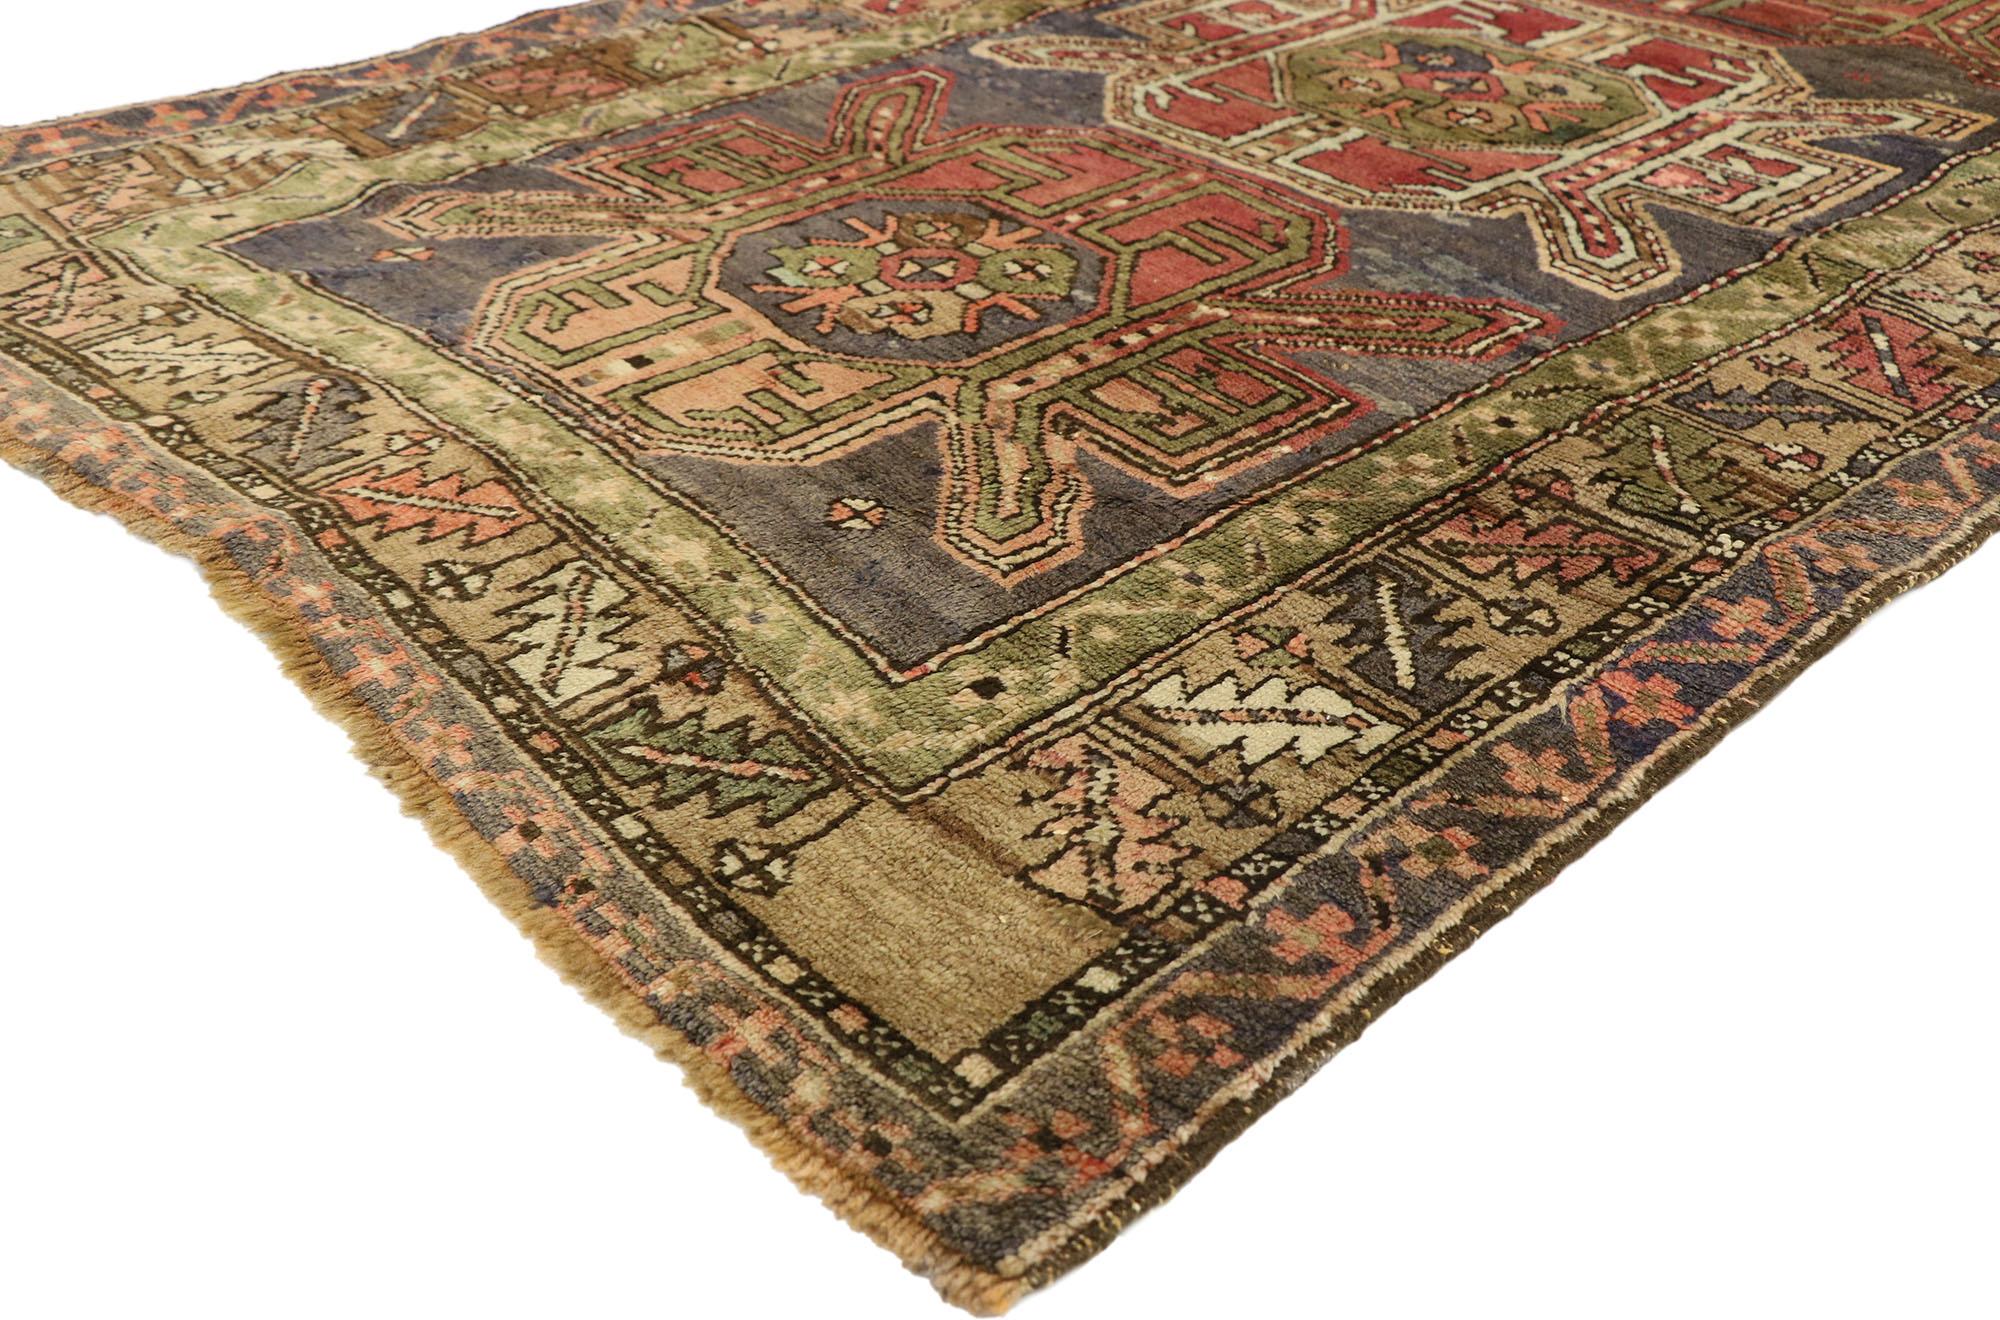 51392, Vintage Turkish Oushak Rug with Tribal Style and Amulet Pattern. This striking Turkish Oushak rug features a triple amulet pattern in time-softened colors. The vintage Oushak rug is bordered with a replicated leaf in red, slate and green on a